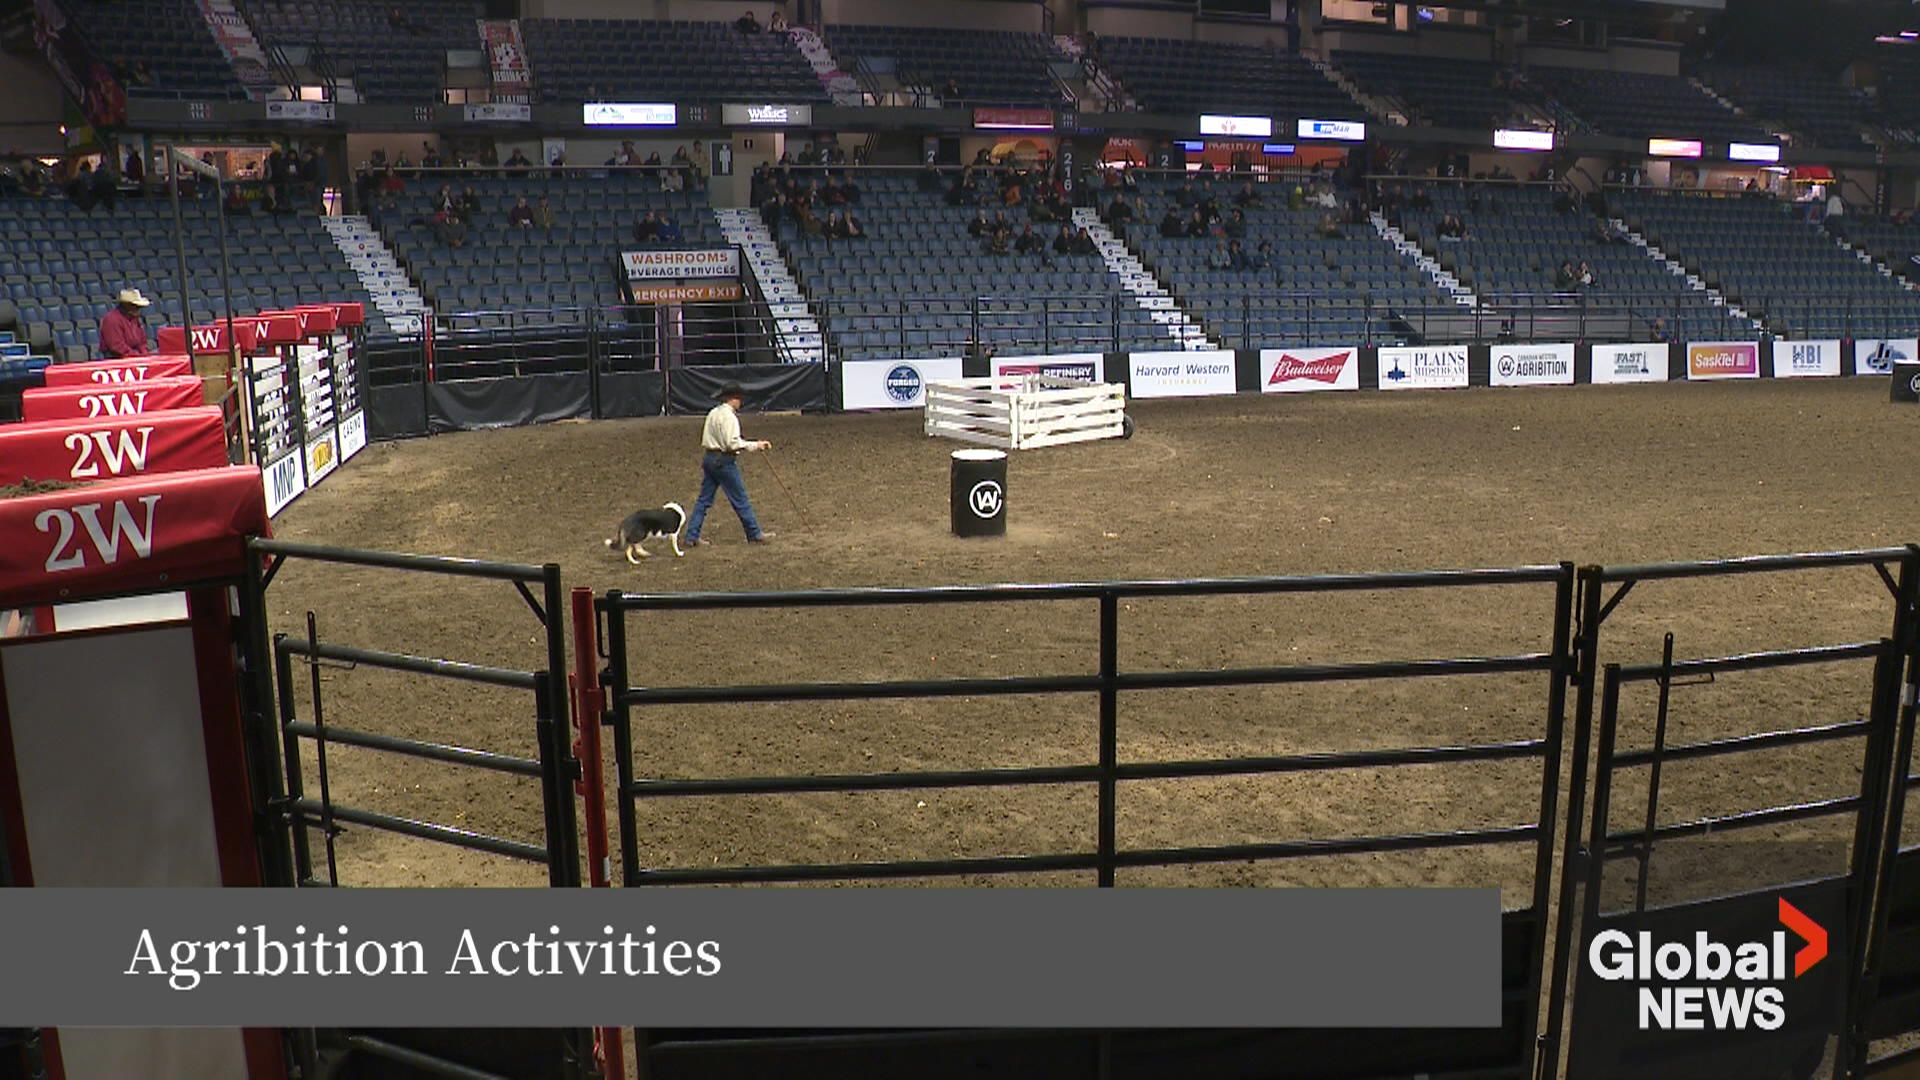 WATCH: Agribition attractions and activities in the Queen City